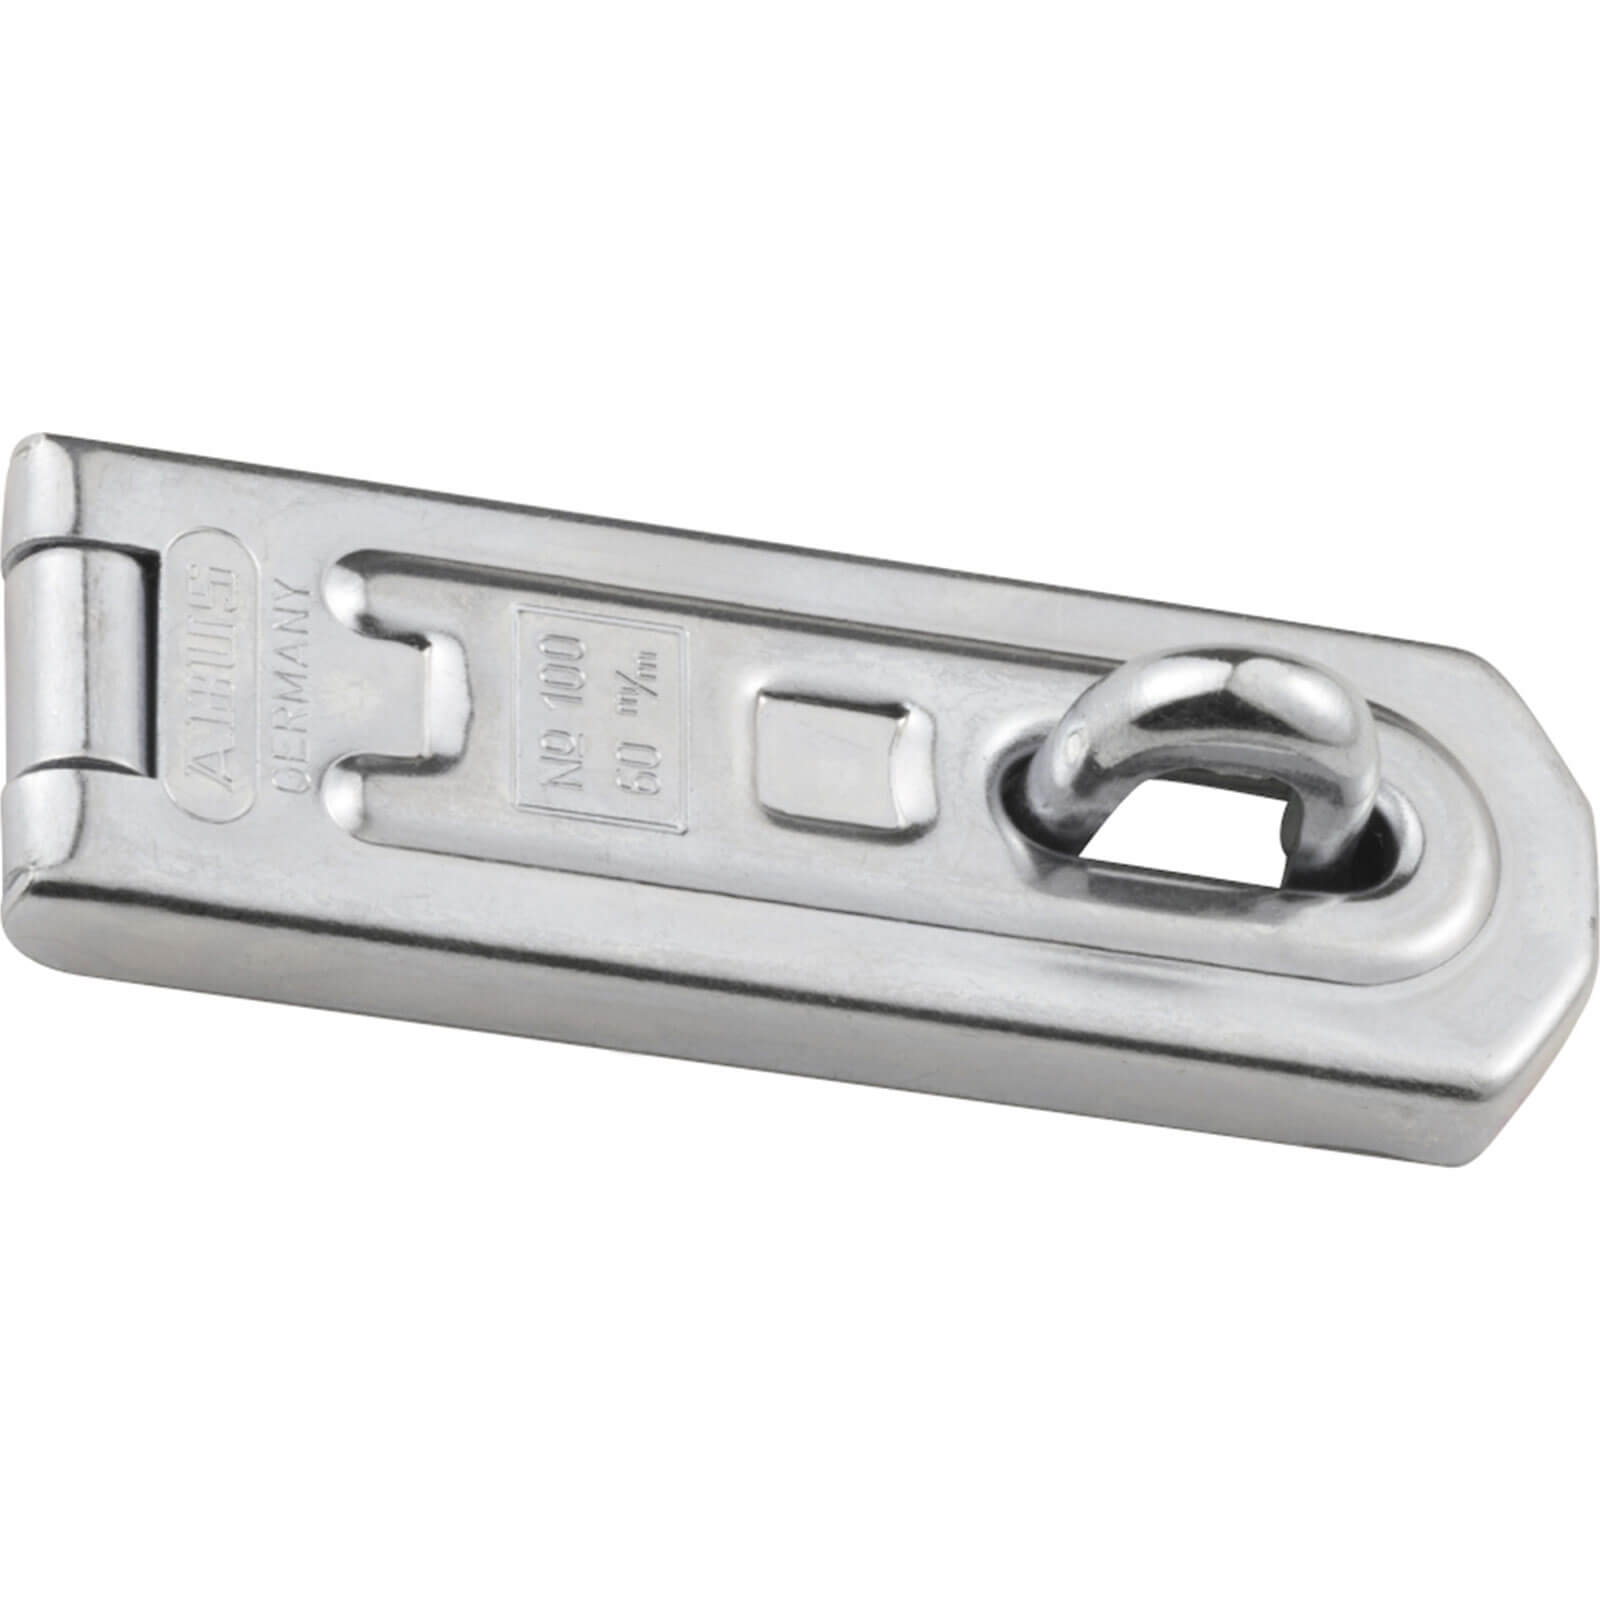 Image of Abus 100 Series Tradition Hasp & Staple 60mm